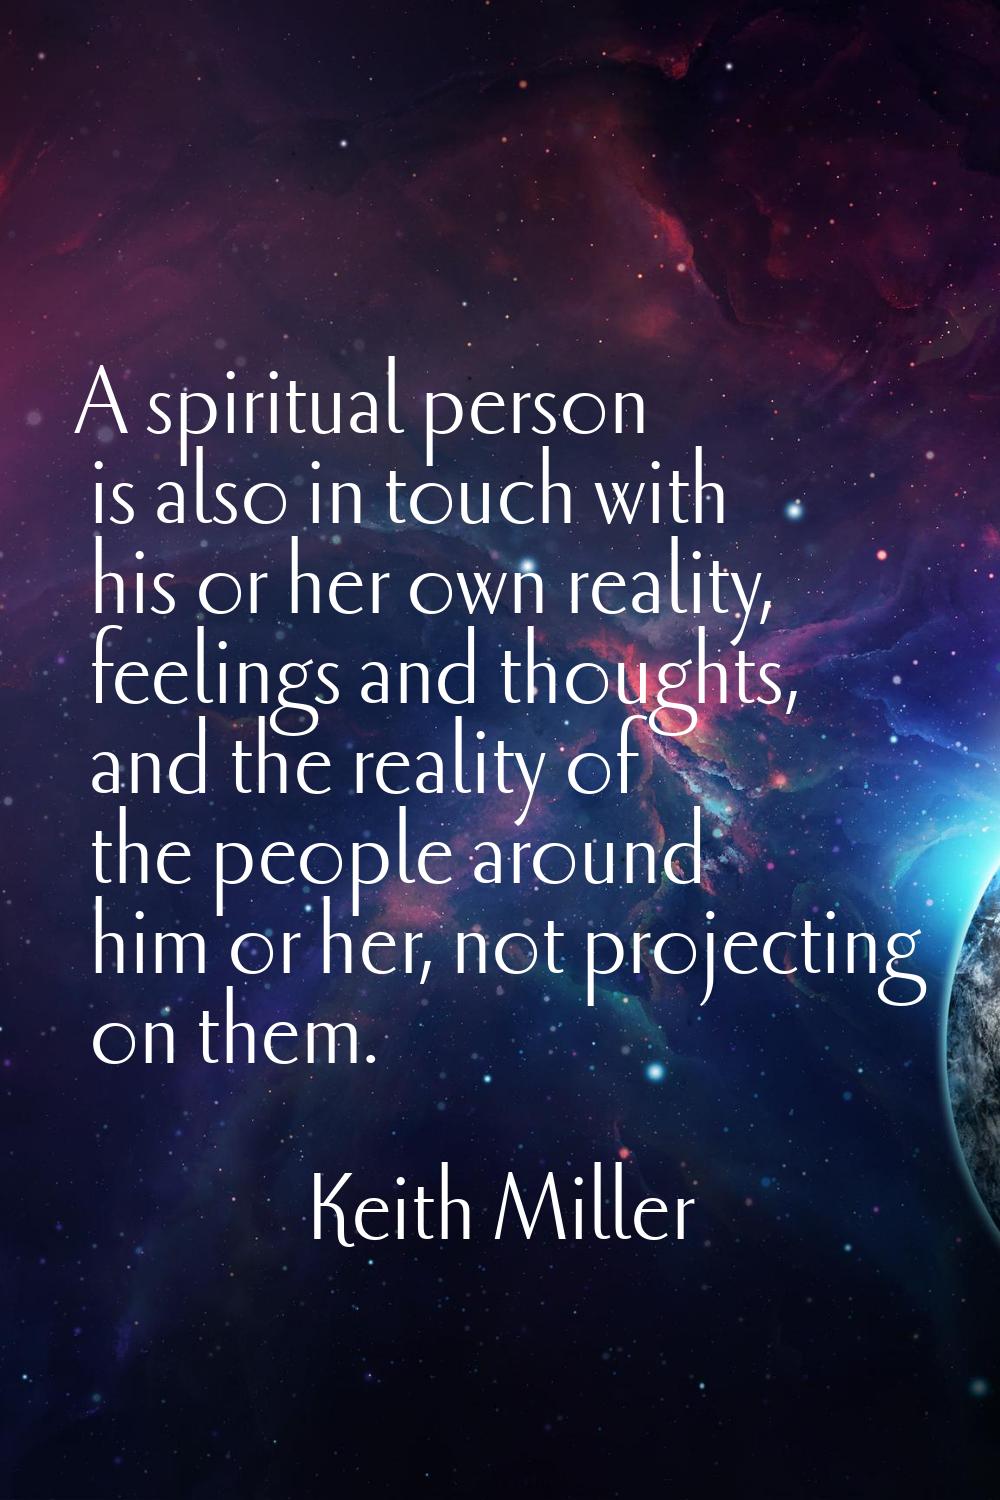 A spiritual person is also in touch with his or her own reality, feelings and thoughts, and the rea